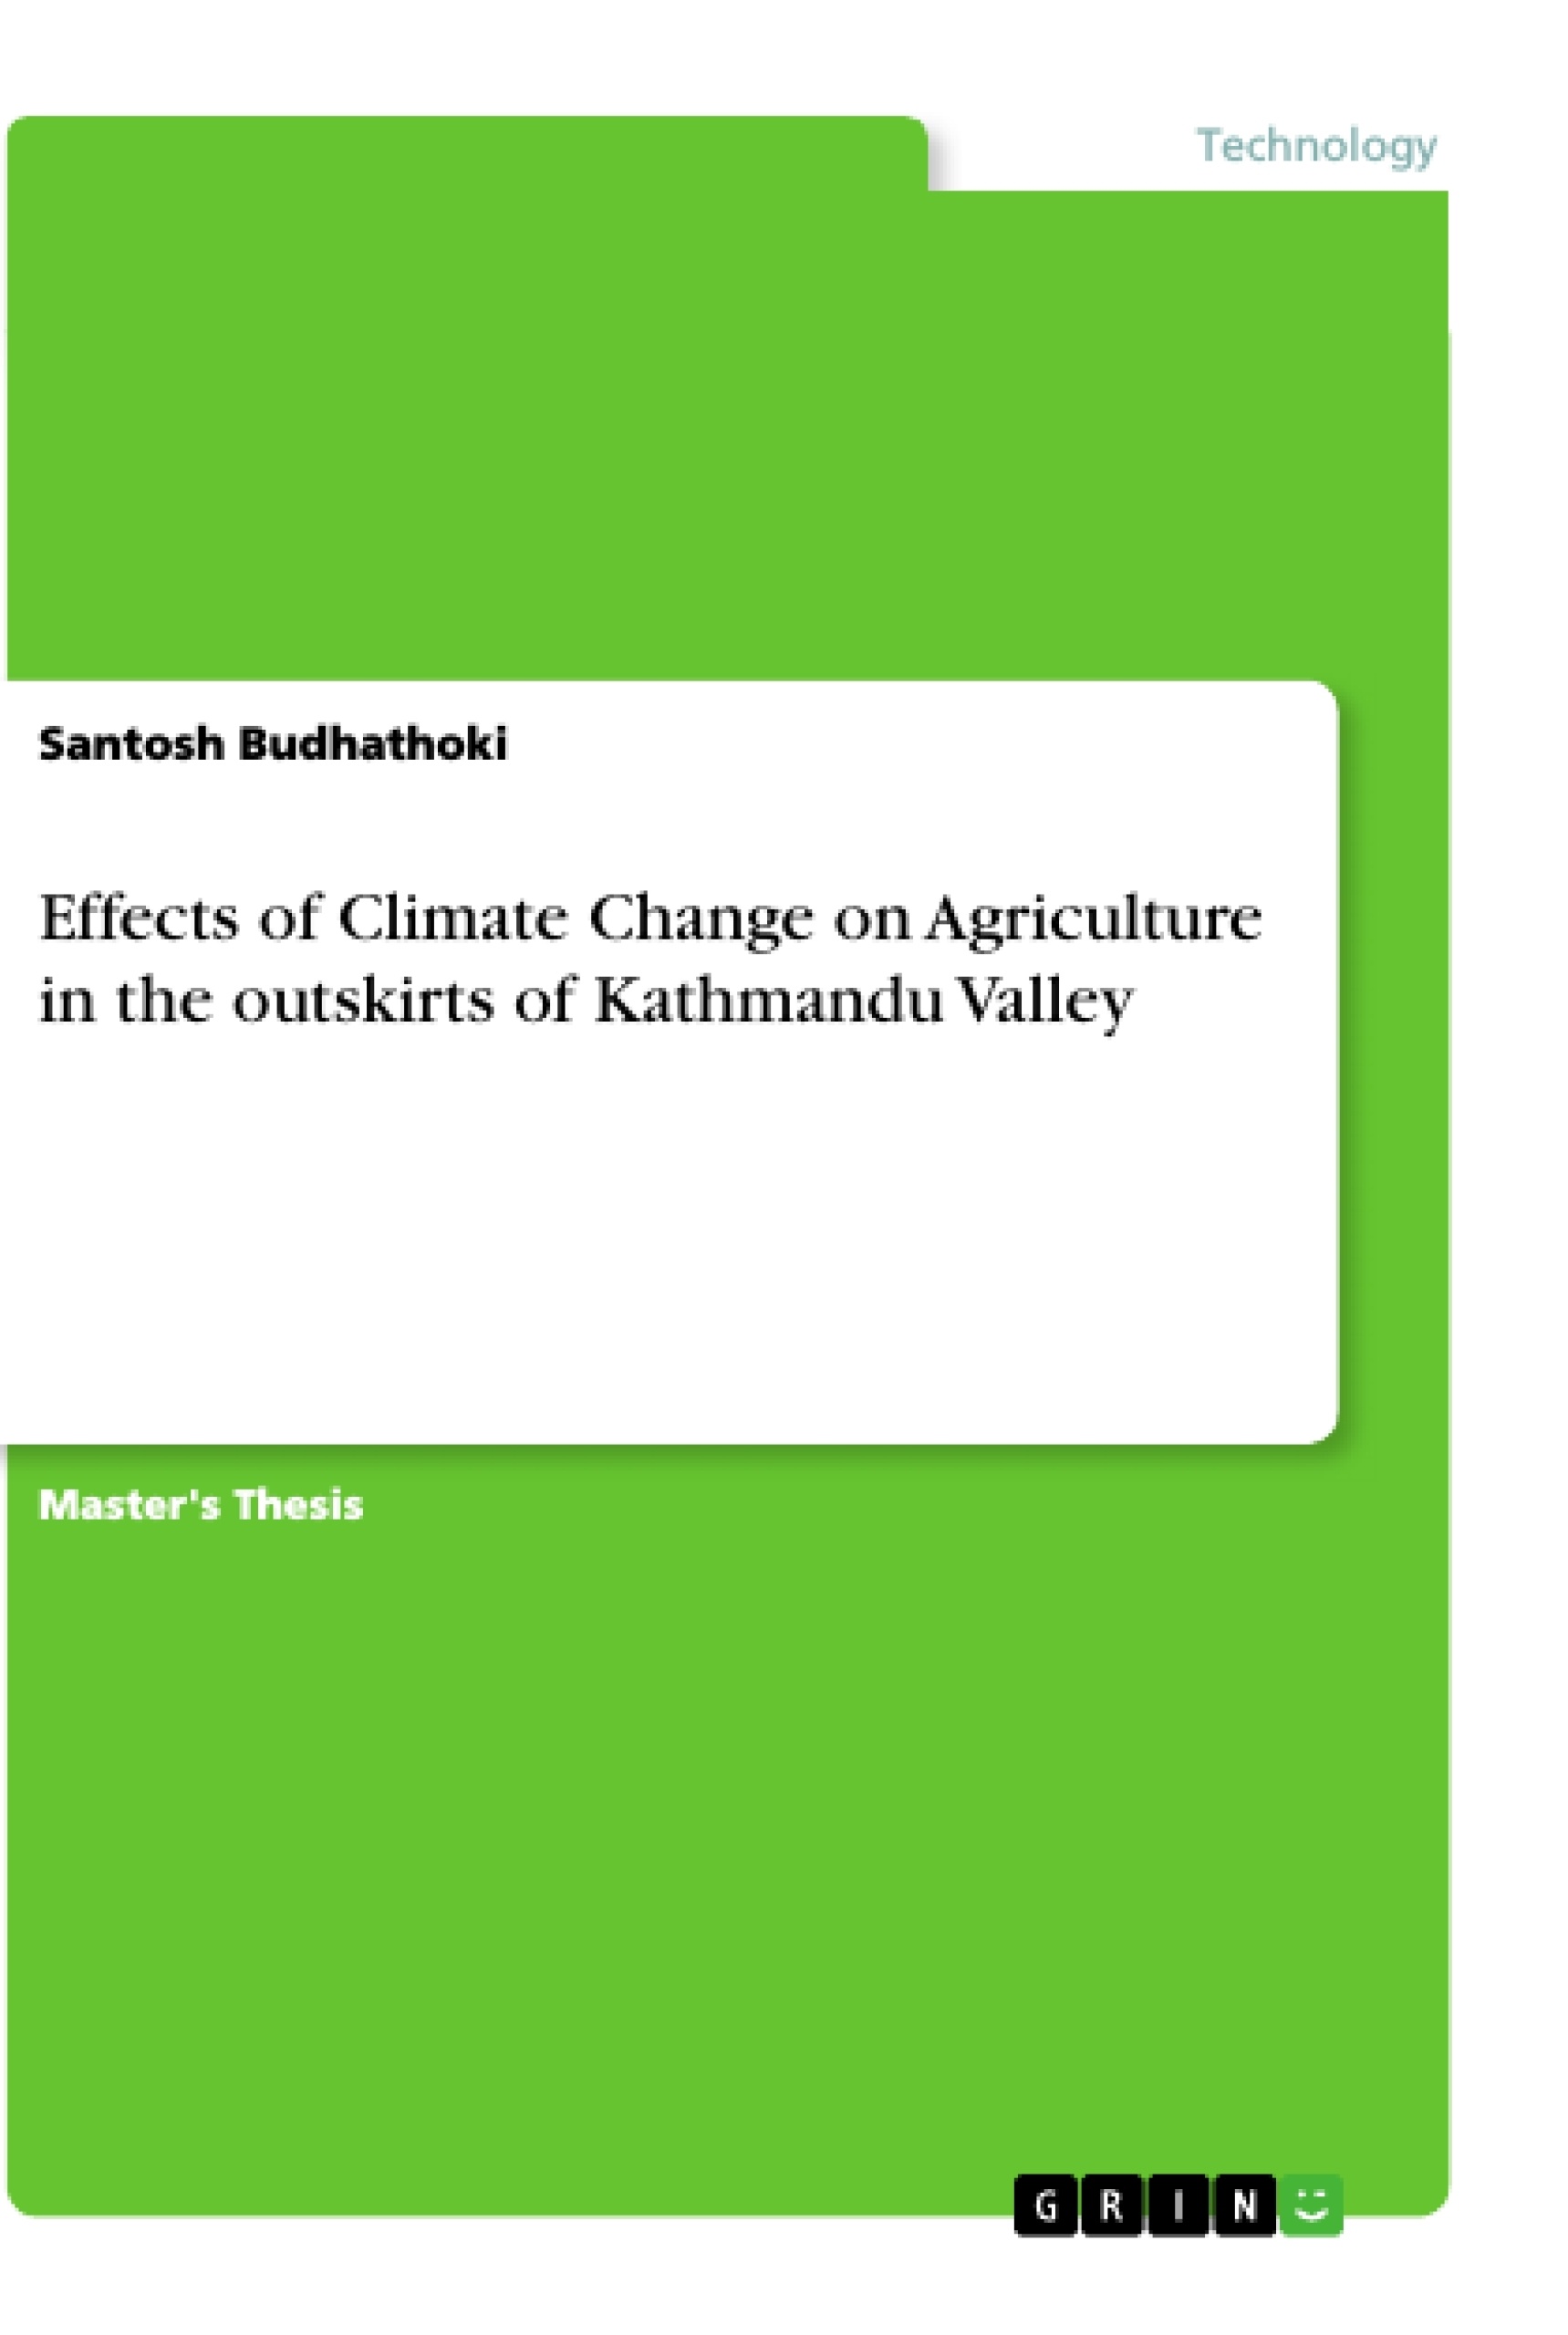 Título: Effects of Climate Change on Agriculture in the outskirts of Kathmandu Valley